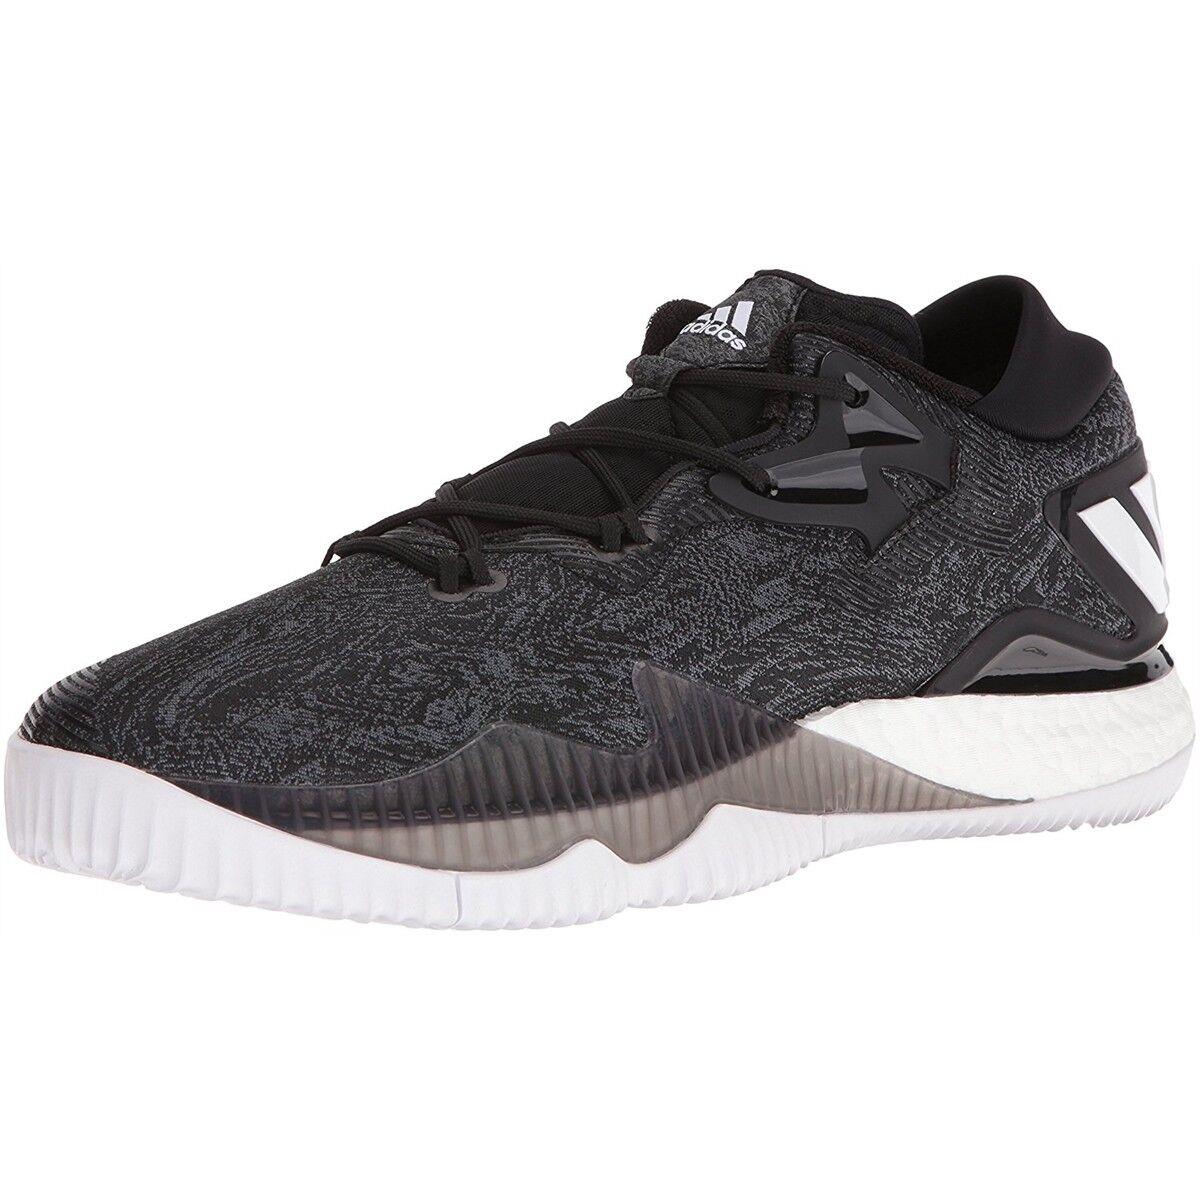 Adidas Men Athletic SM CL Crazylight Boost Low 2016 Vets Day Basketball Shoes Black/White